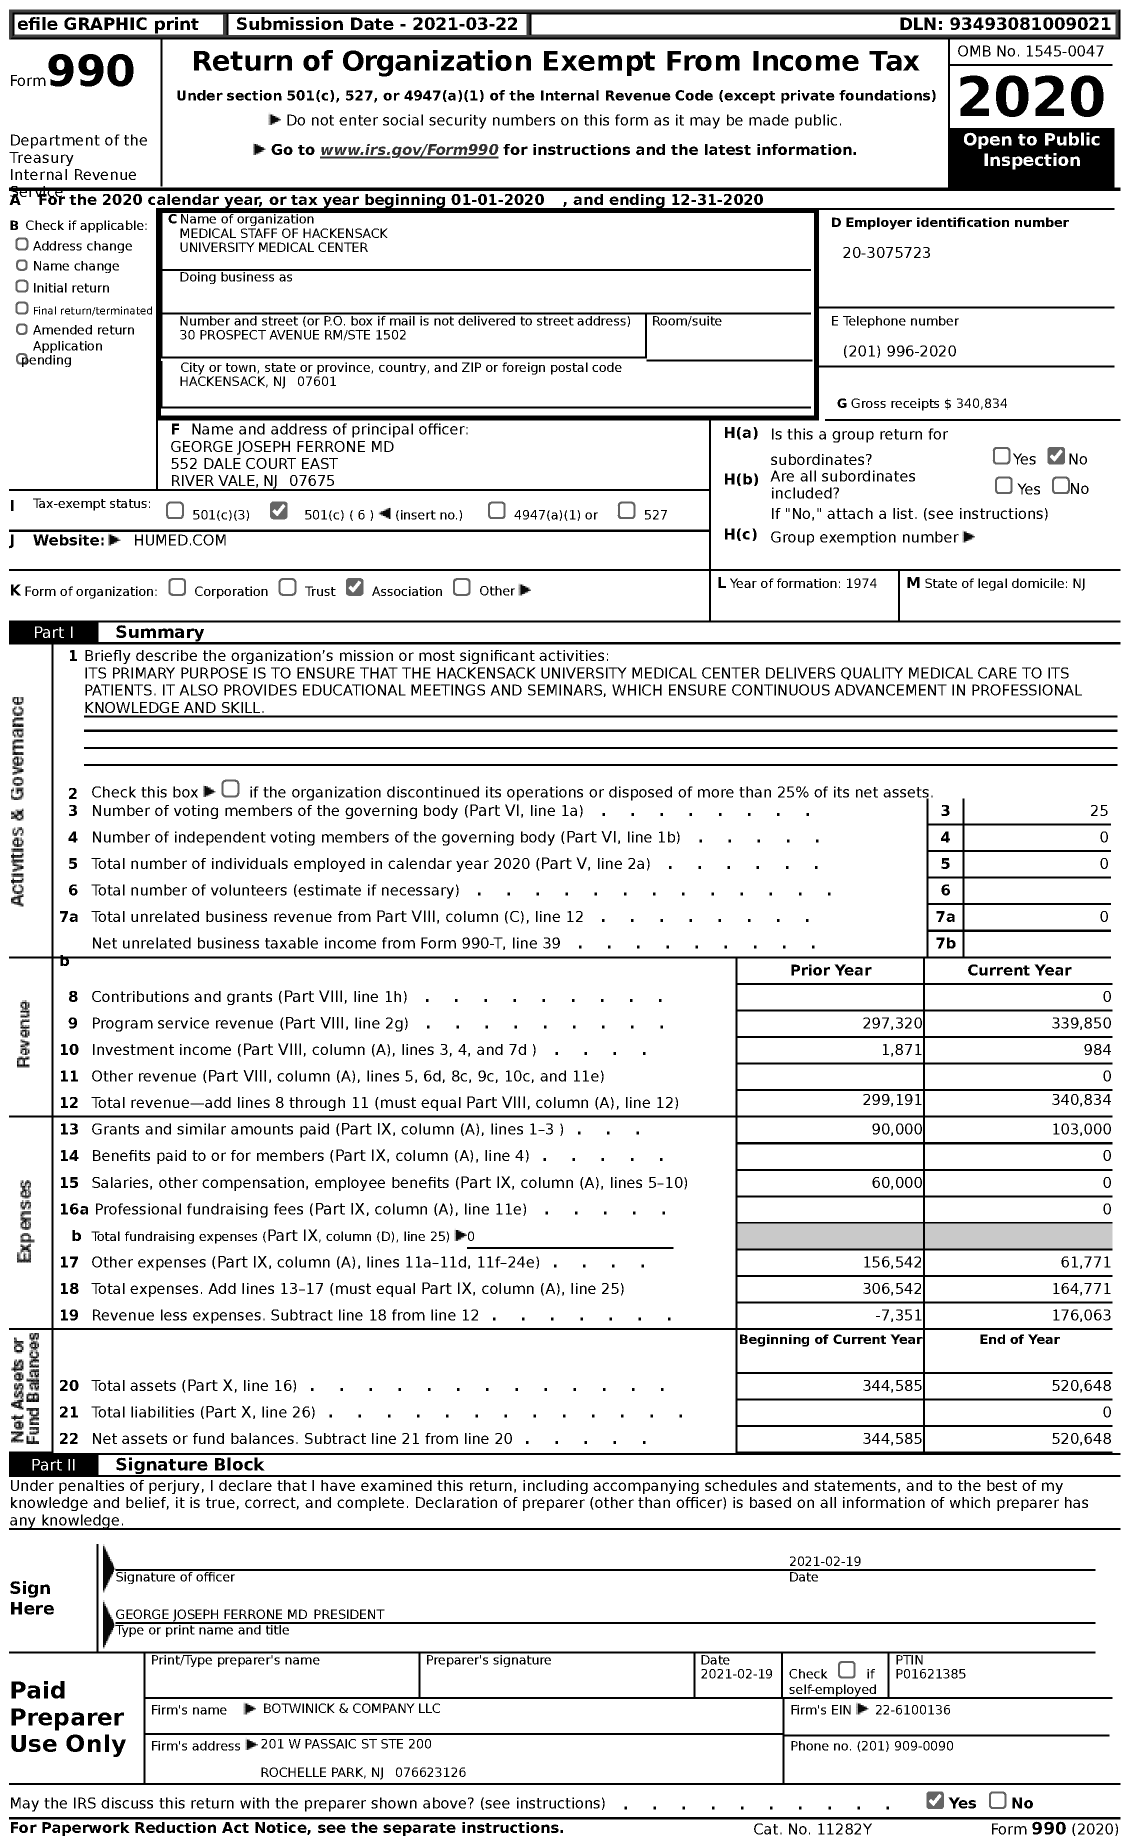 Image of first page of 2020 Form 990 for Medical Staff of Hackensack University Medical Center